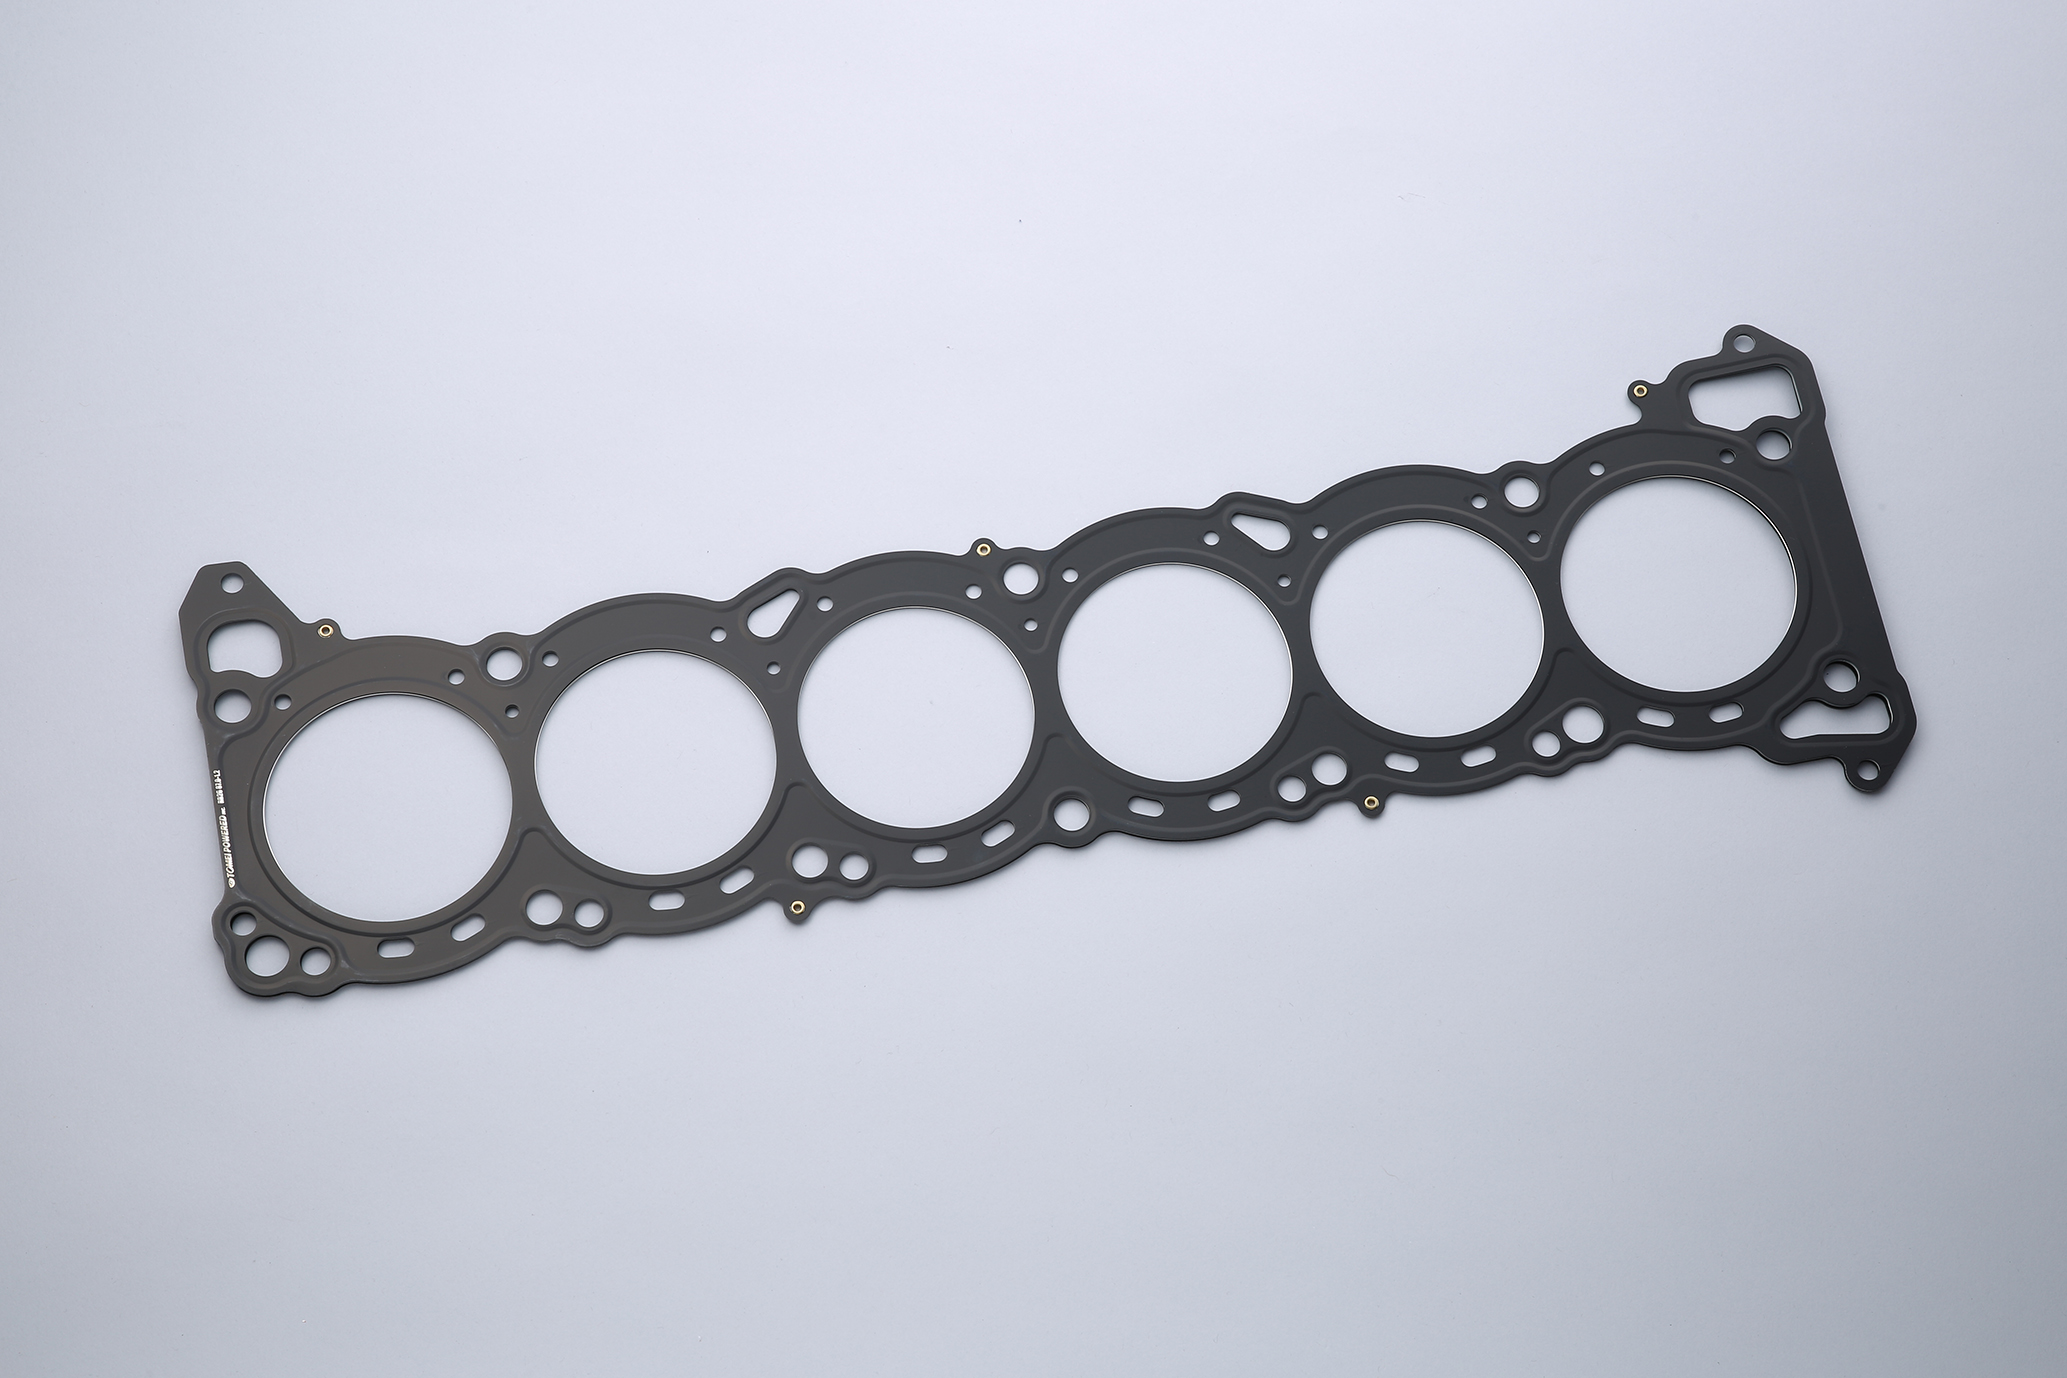 HEAD GASKET for RB26DETT － TOMEI POWERED INC. ONLINE CATALOGUE